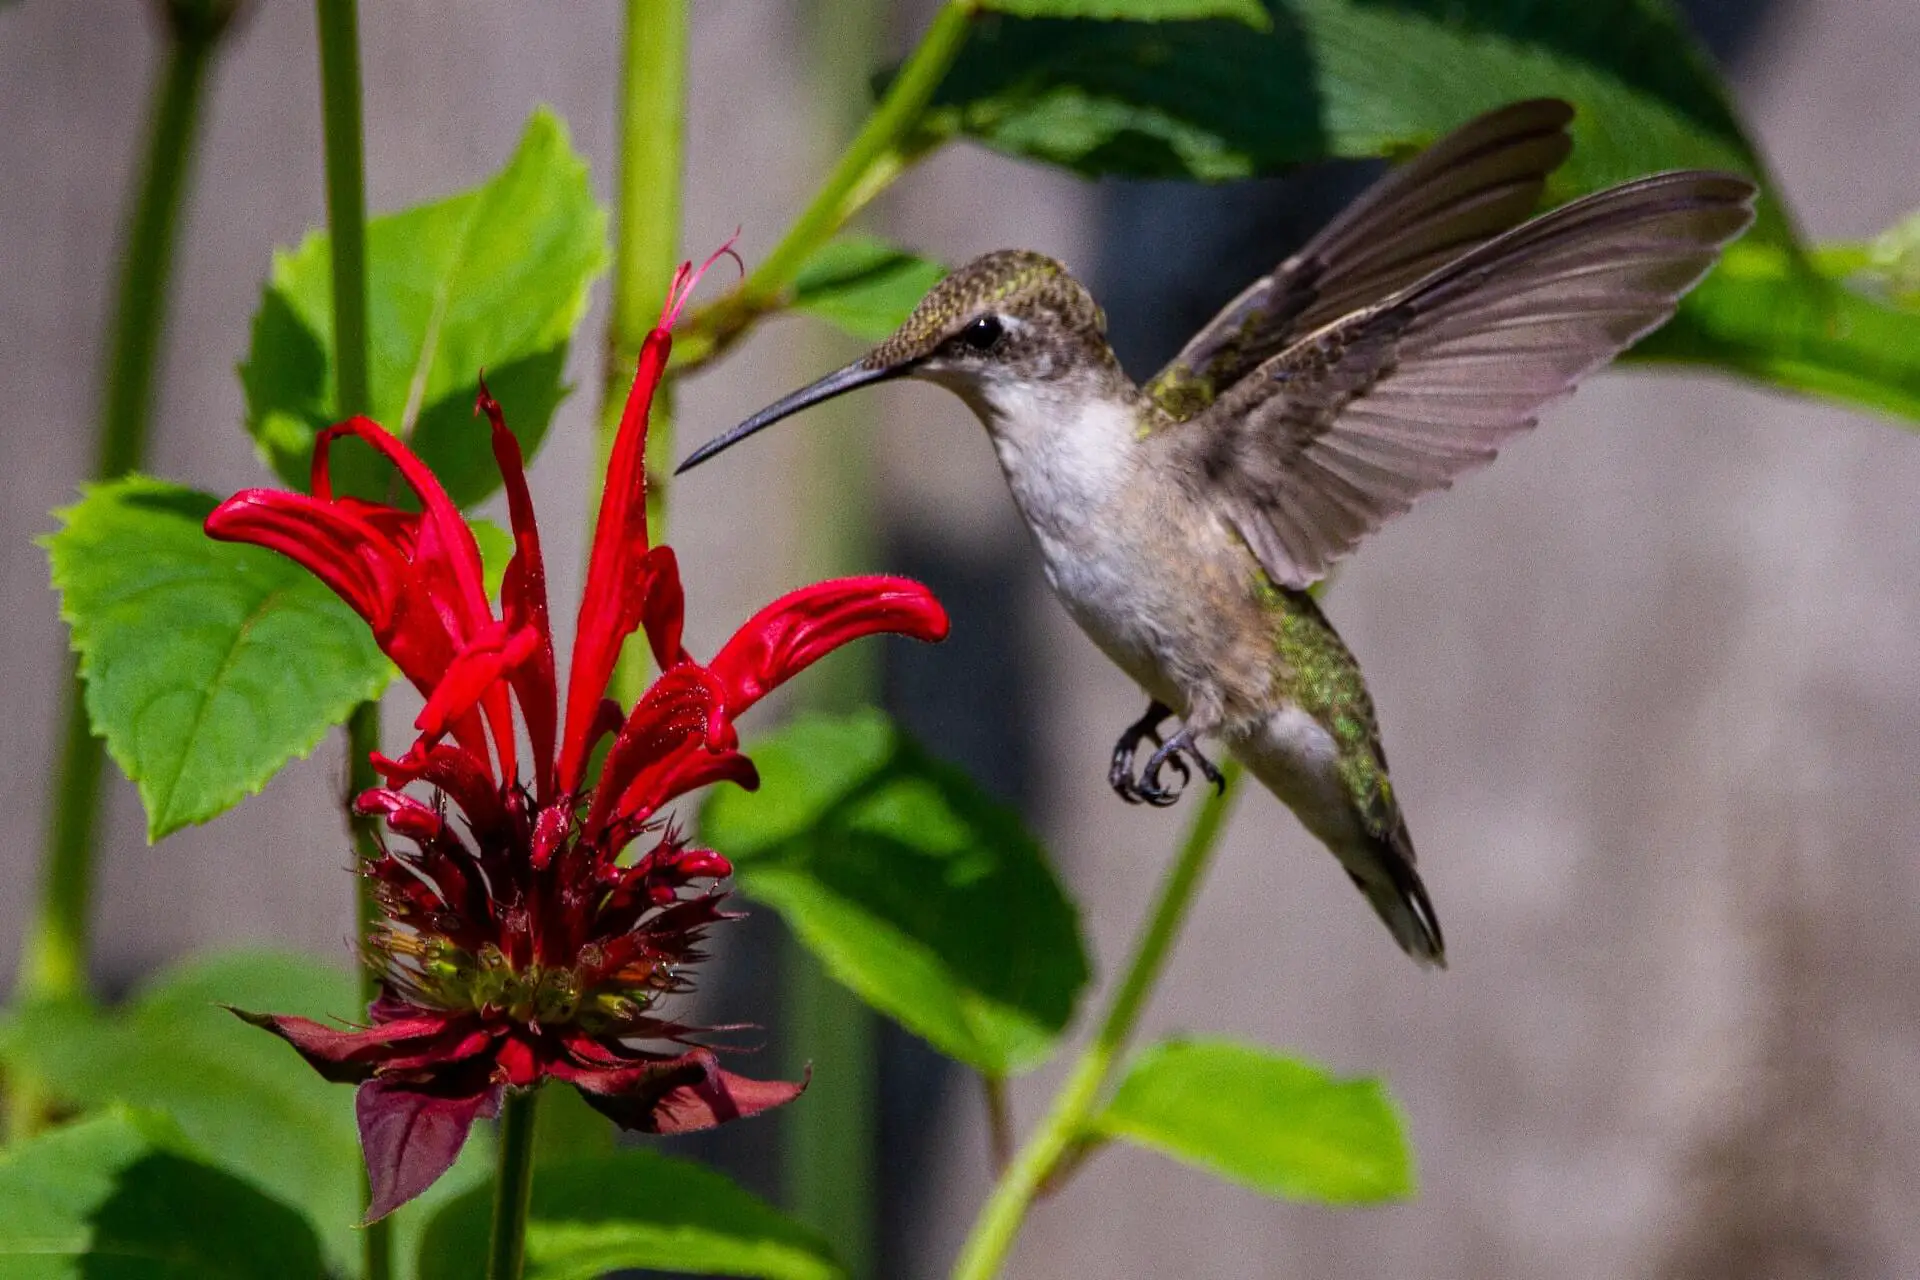 A hummingbird hovering near scarlet red bee balm.